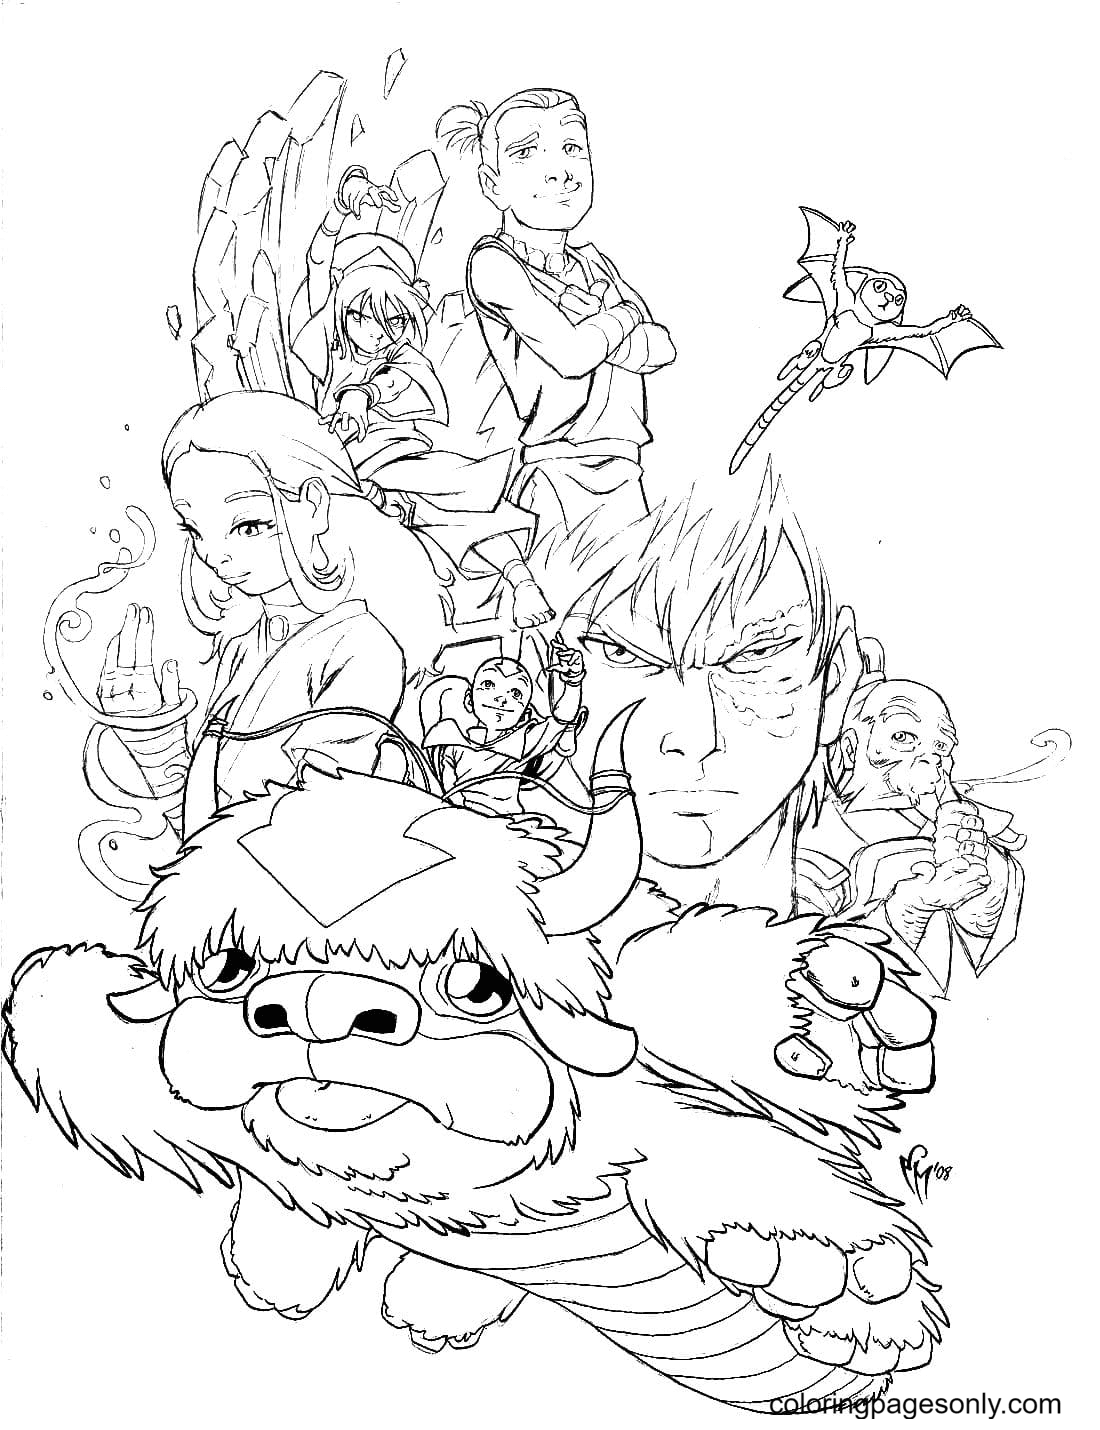 Avatar The Last Airbender Coloring Page